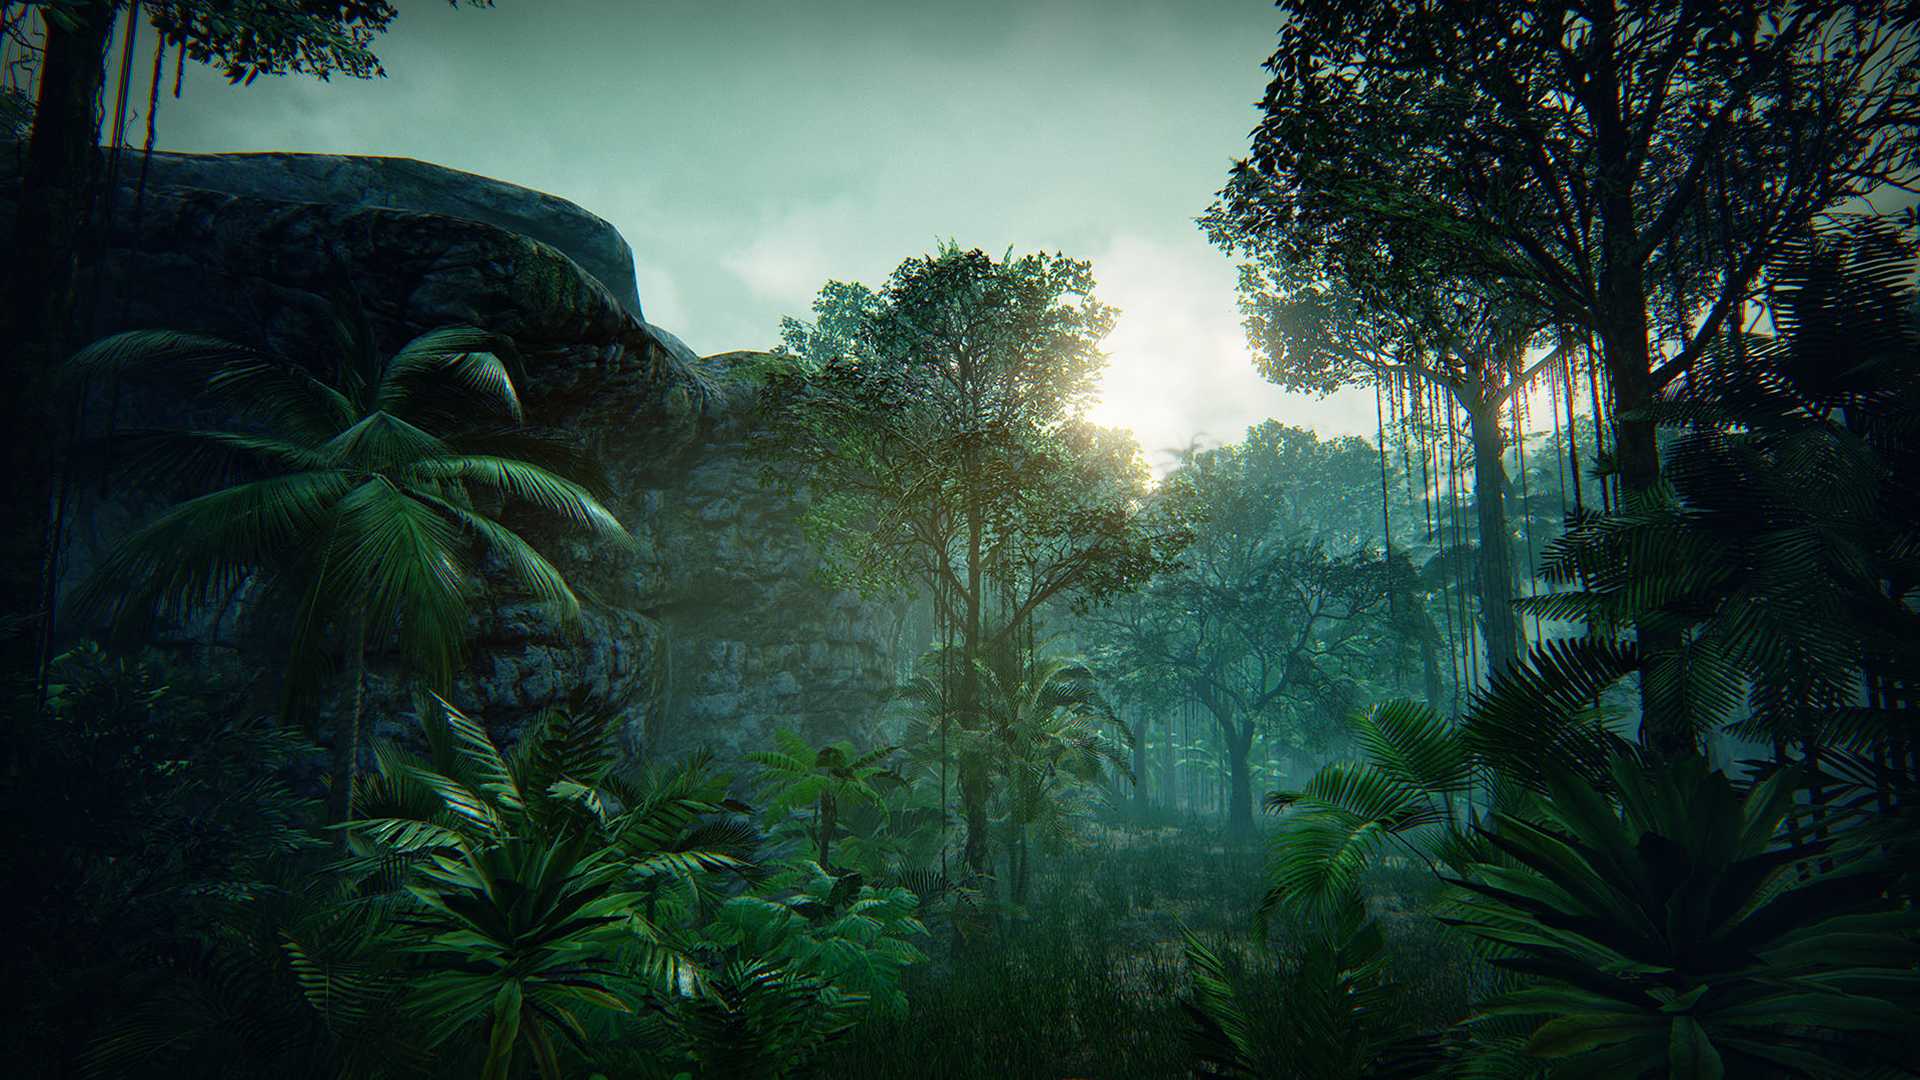 Tropical Forest by Manufactura K4 in Environments - UE4 Marketplace